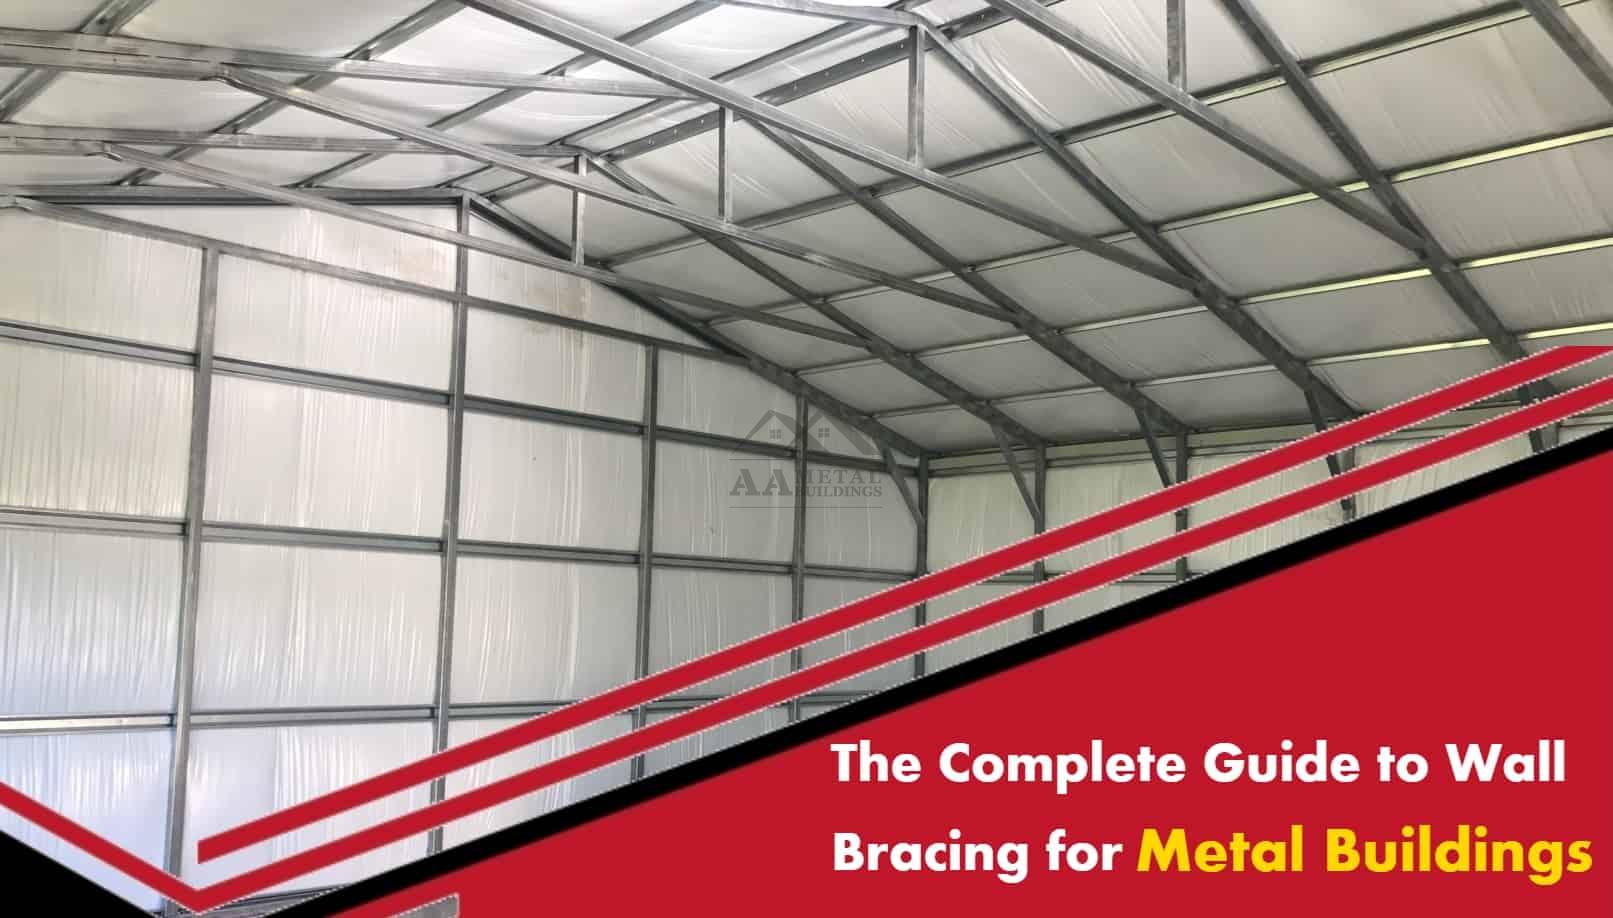 The Complete Guide to Wall Bracing for Metal Buildings